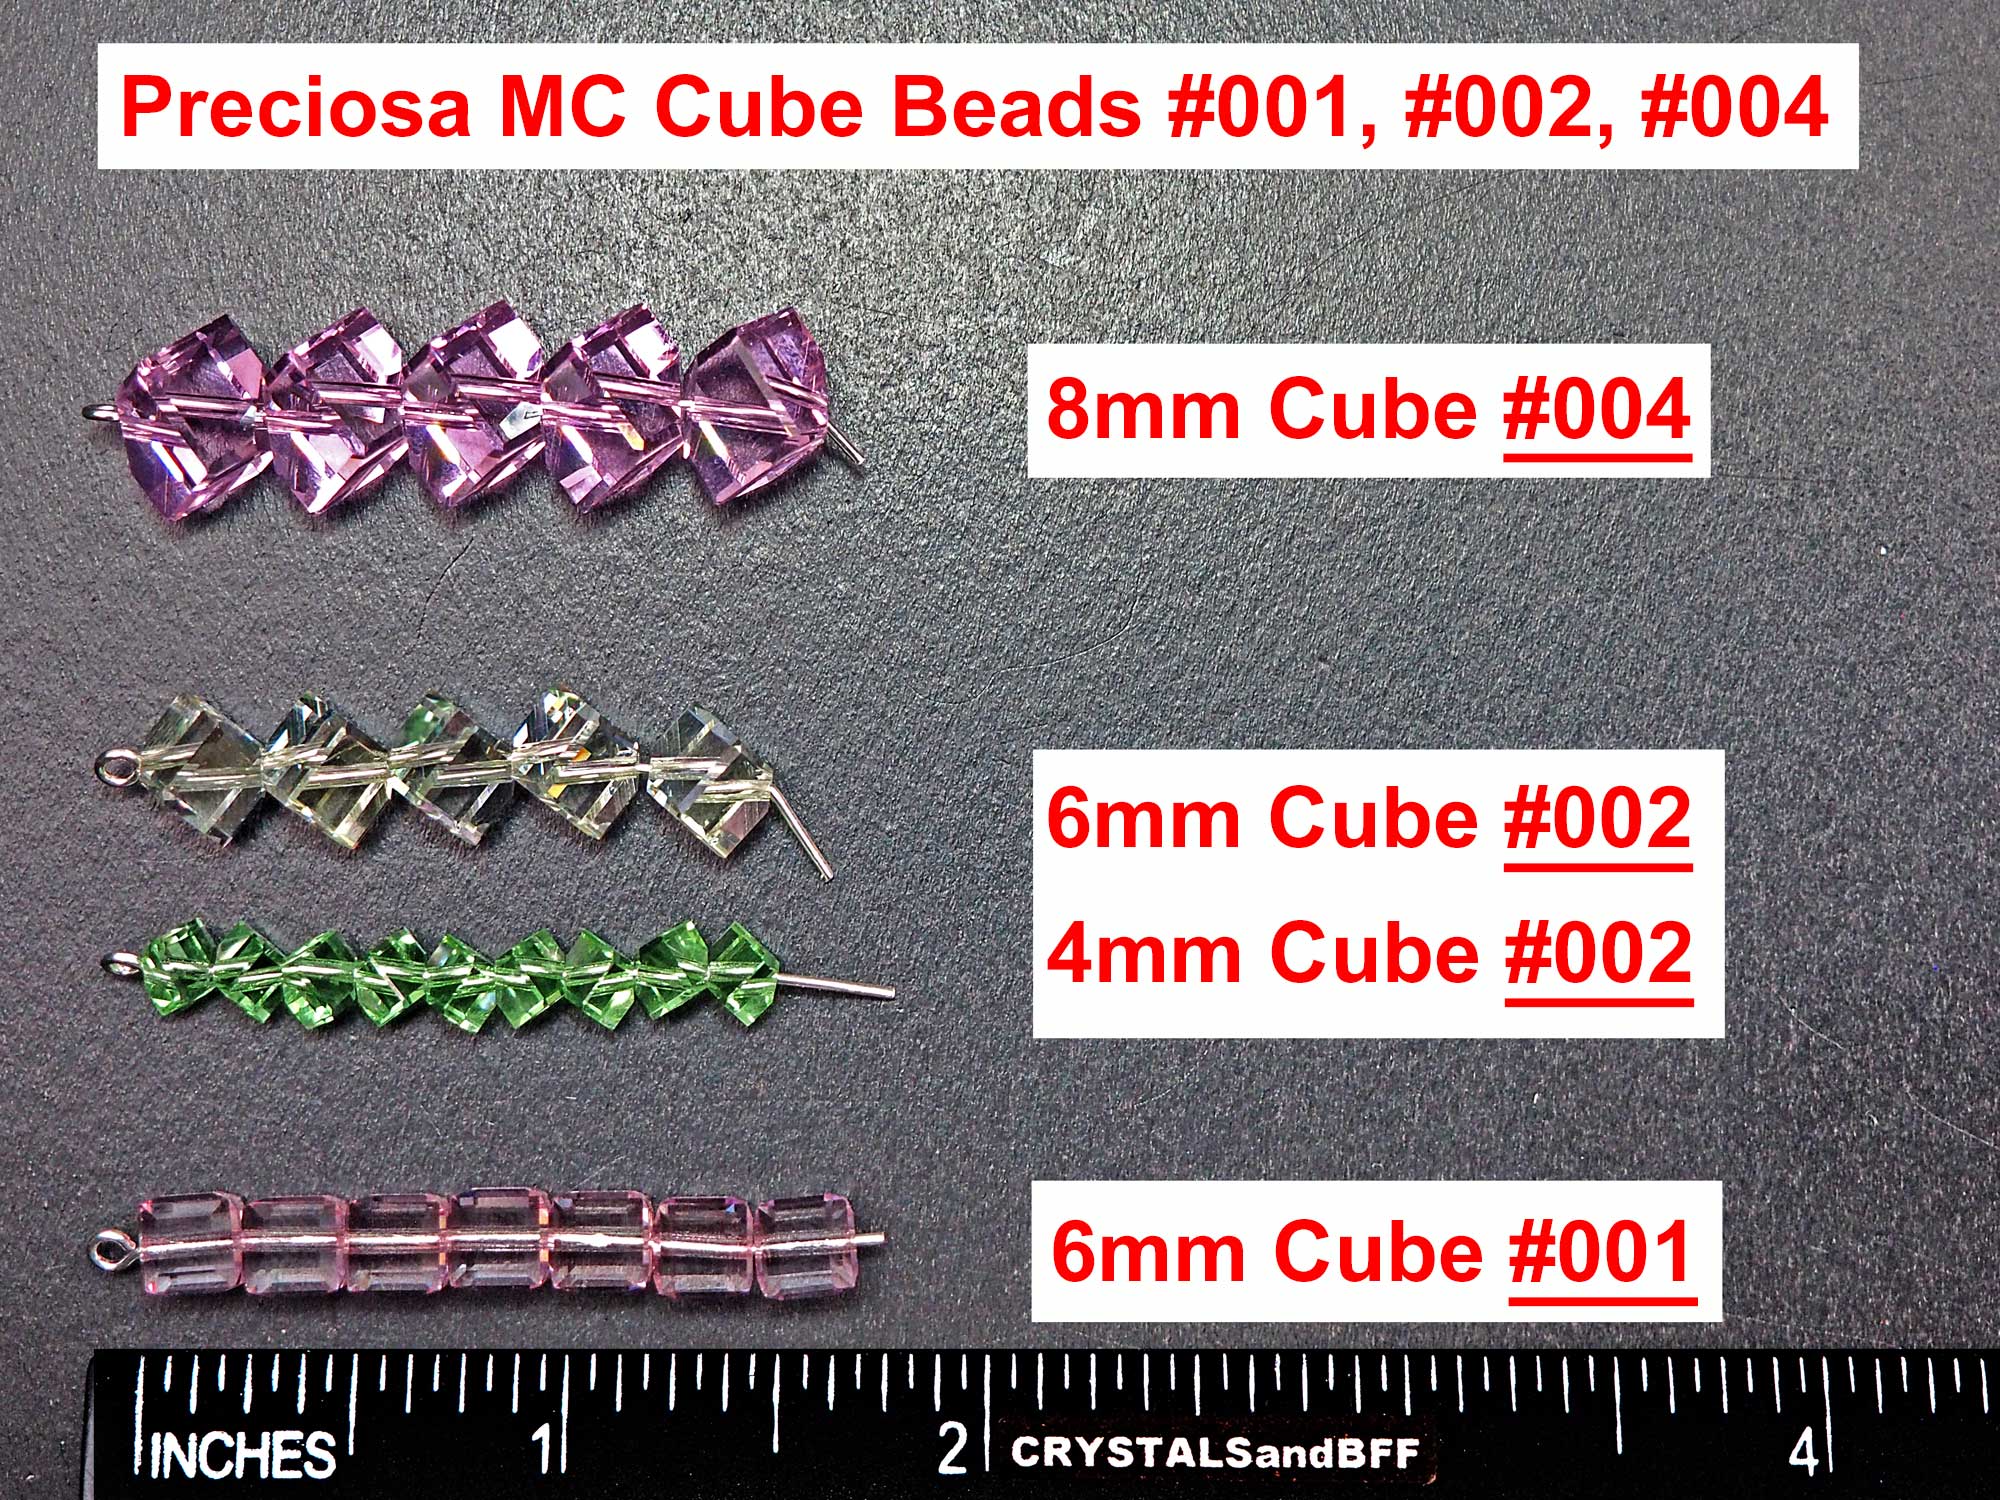 Crystal Light Pink coated, Preciosa Czech Machine Cut Cube #001 Crystal Beads, size 6mm, 12 pieces